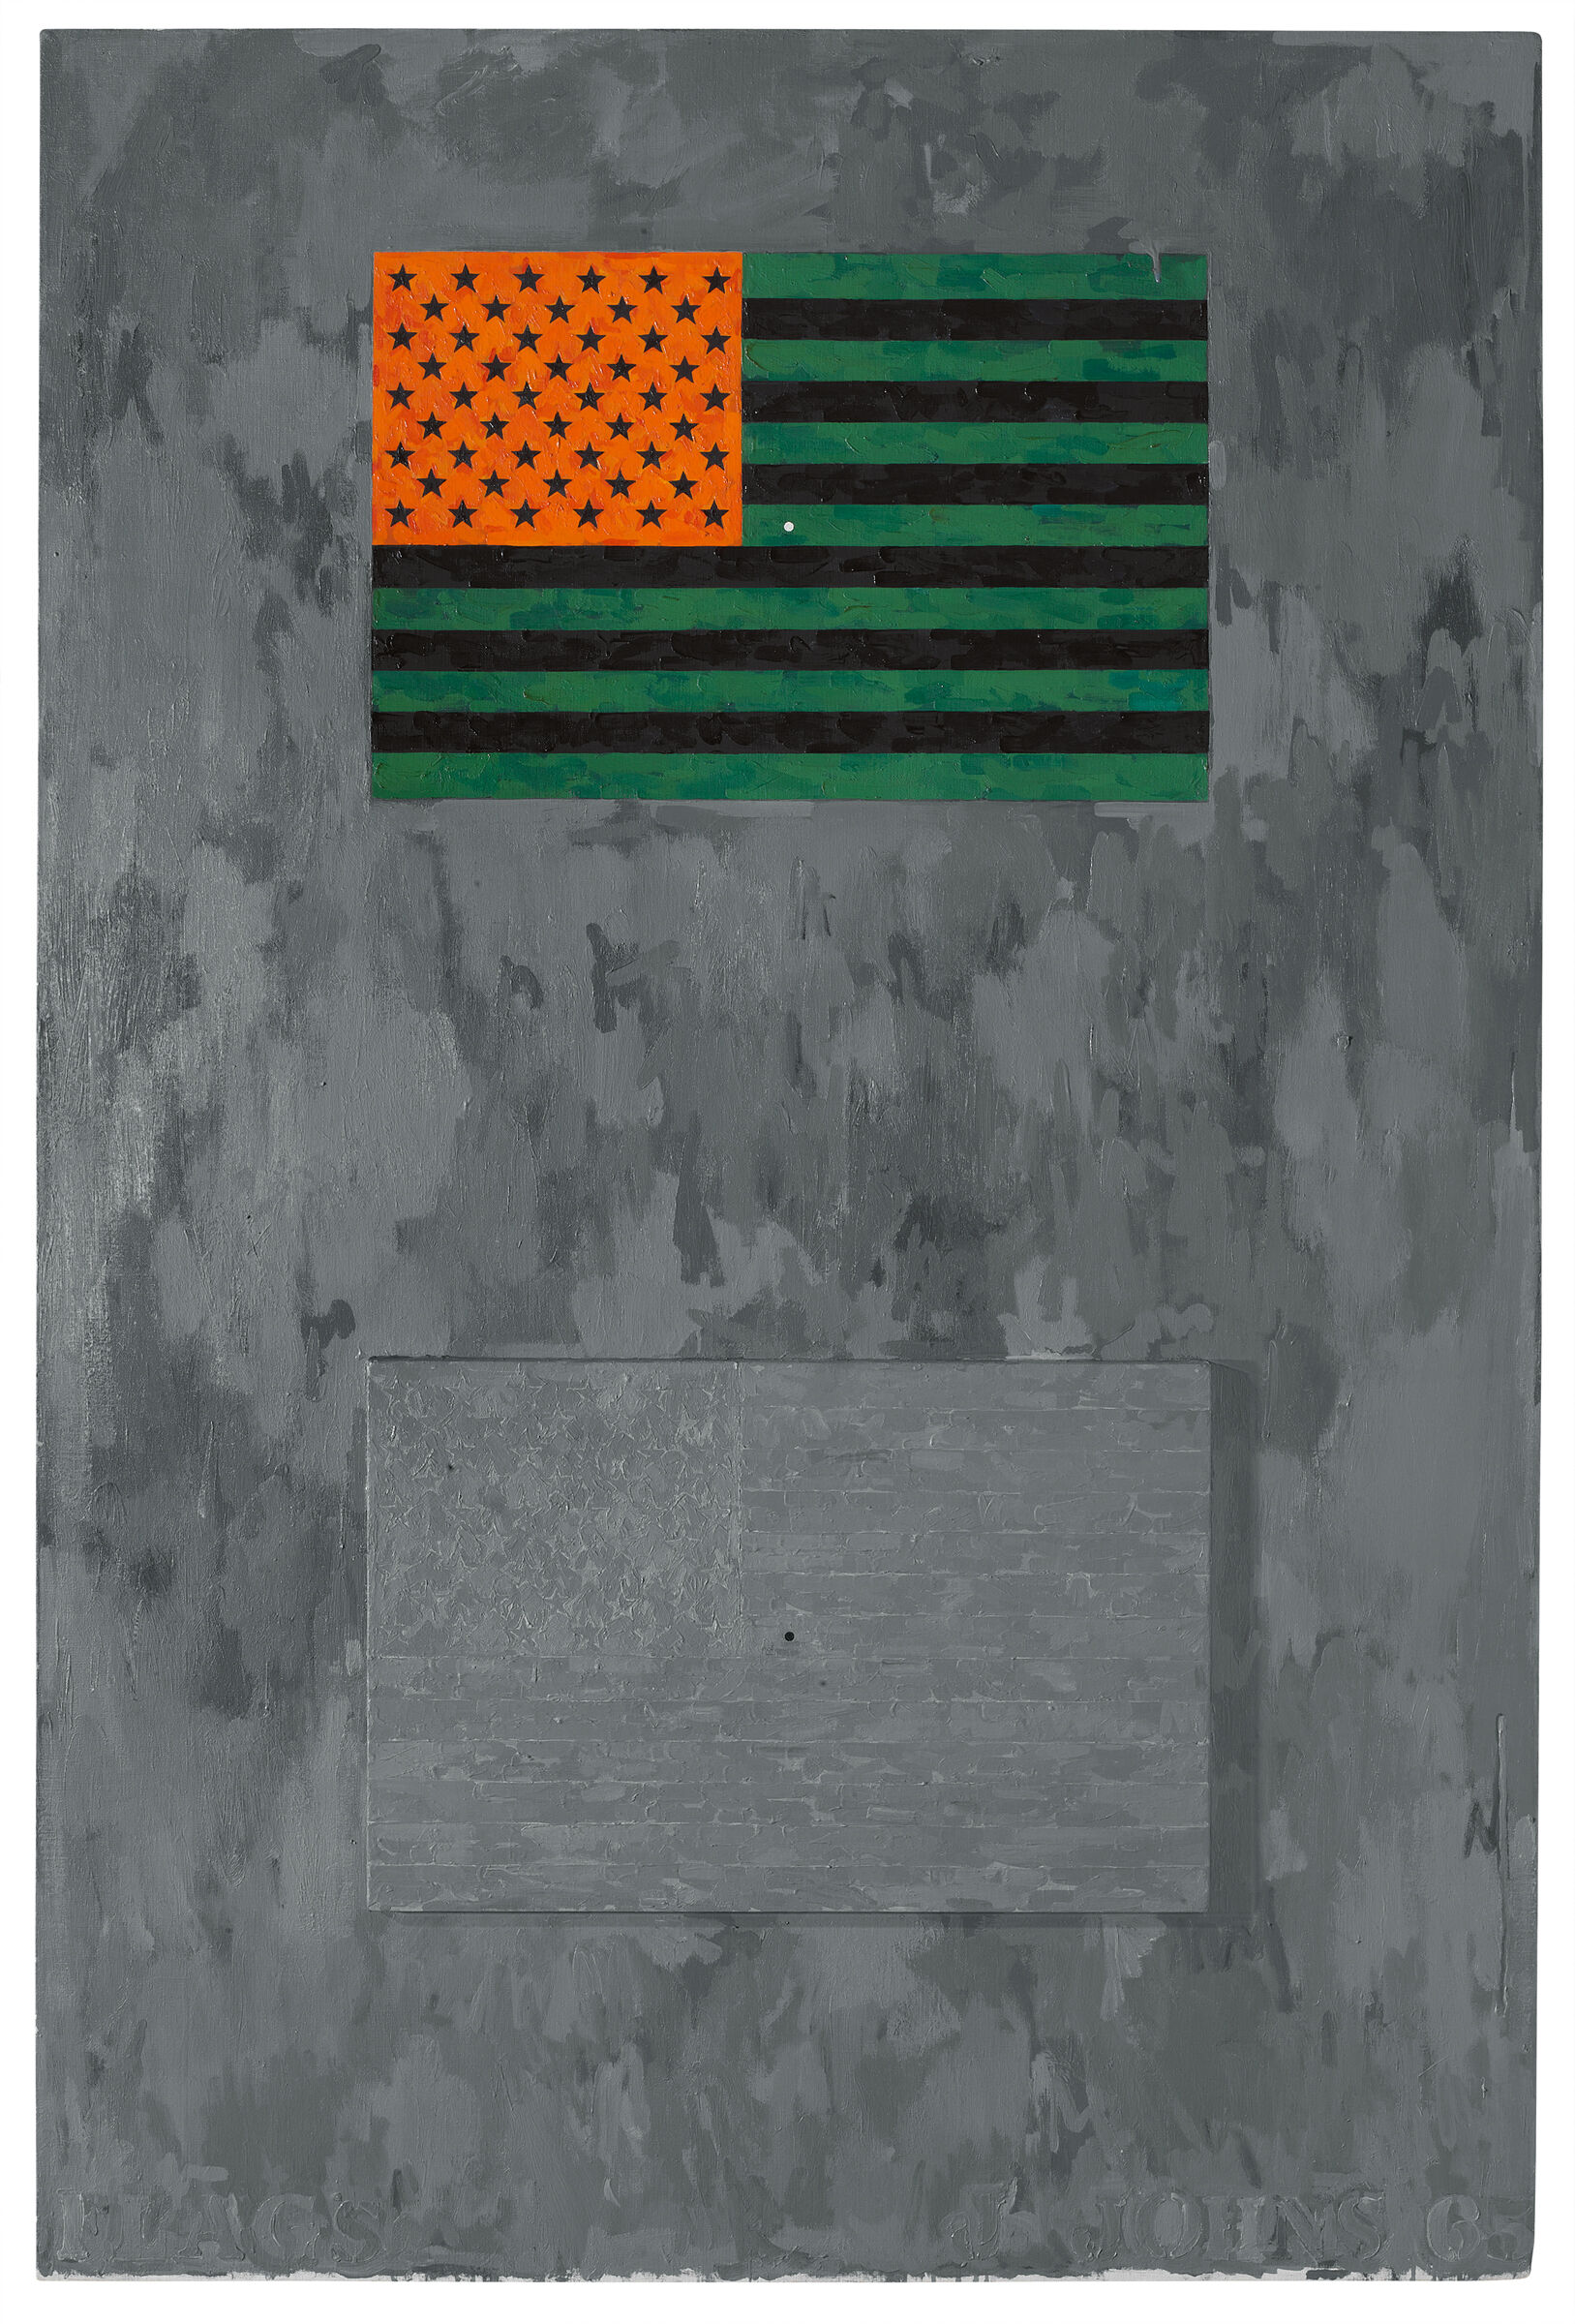 Orange, green, and black American flag in the top half of the composition, mirrored by an all-gray American flag in the bottom half, and both set against a background of gray brushstrokes in varying hues.